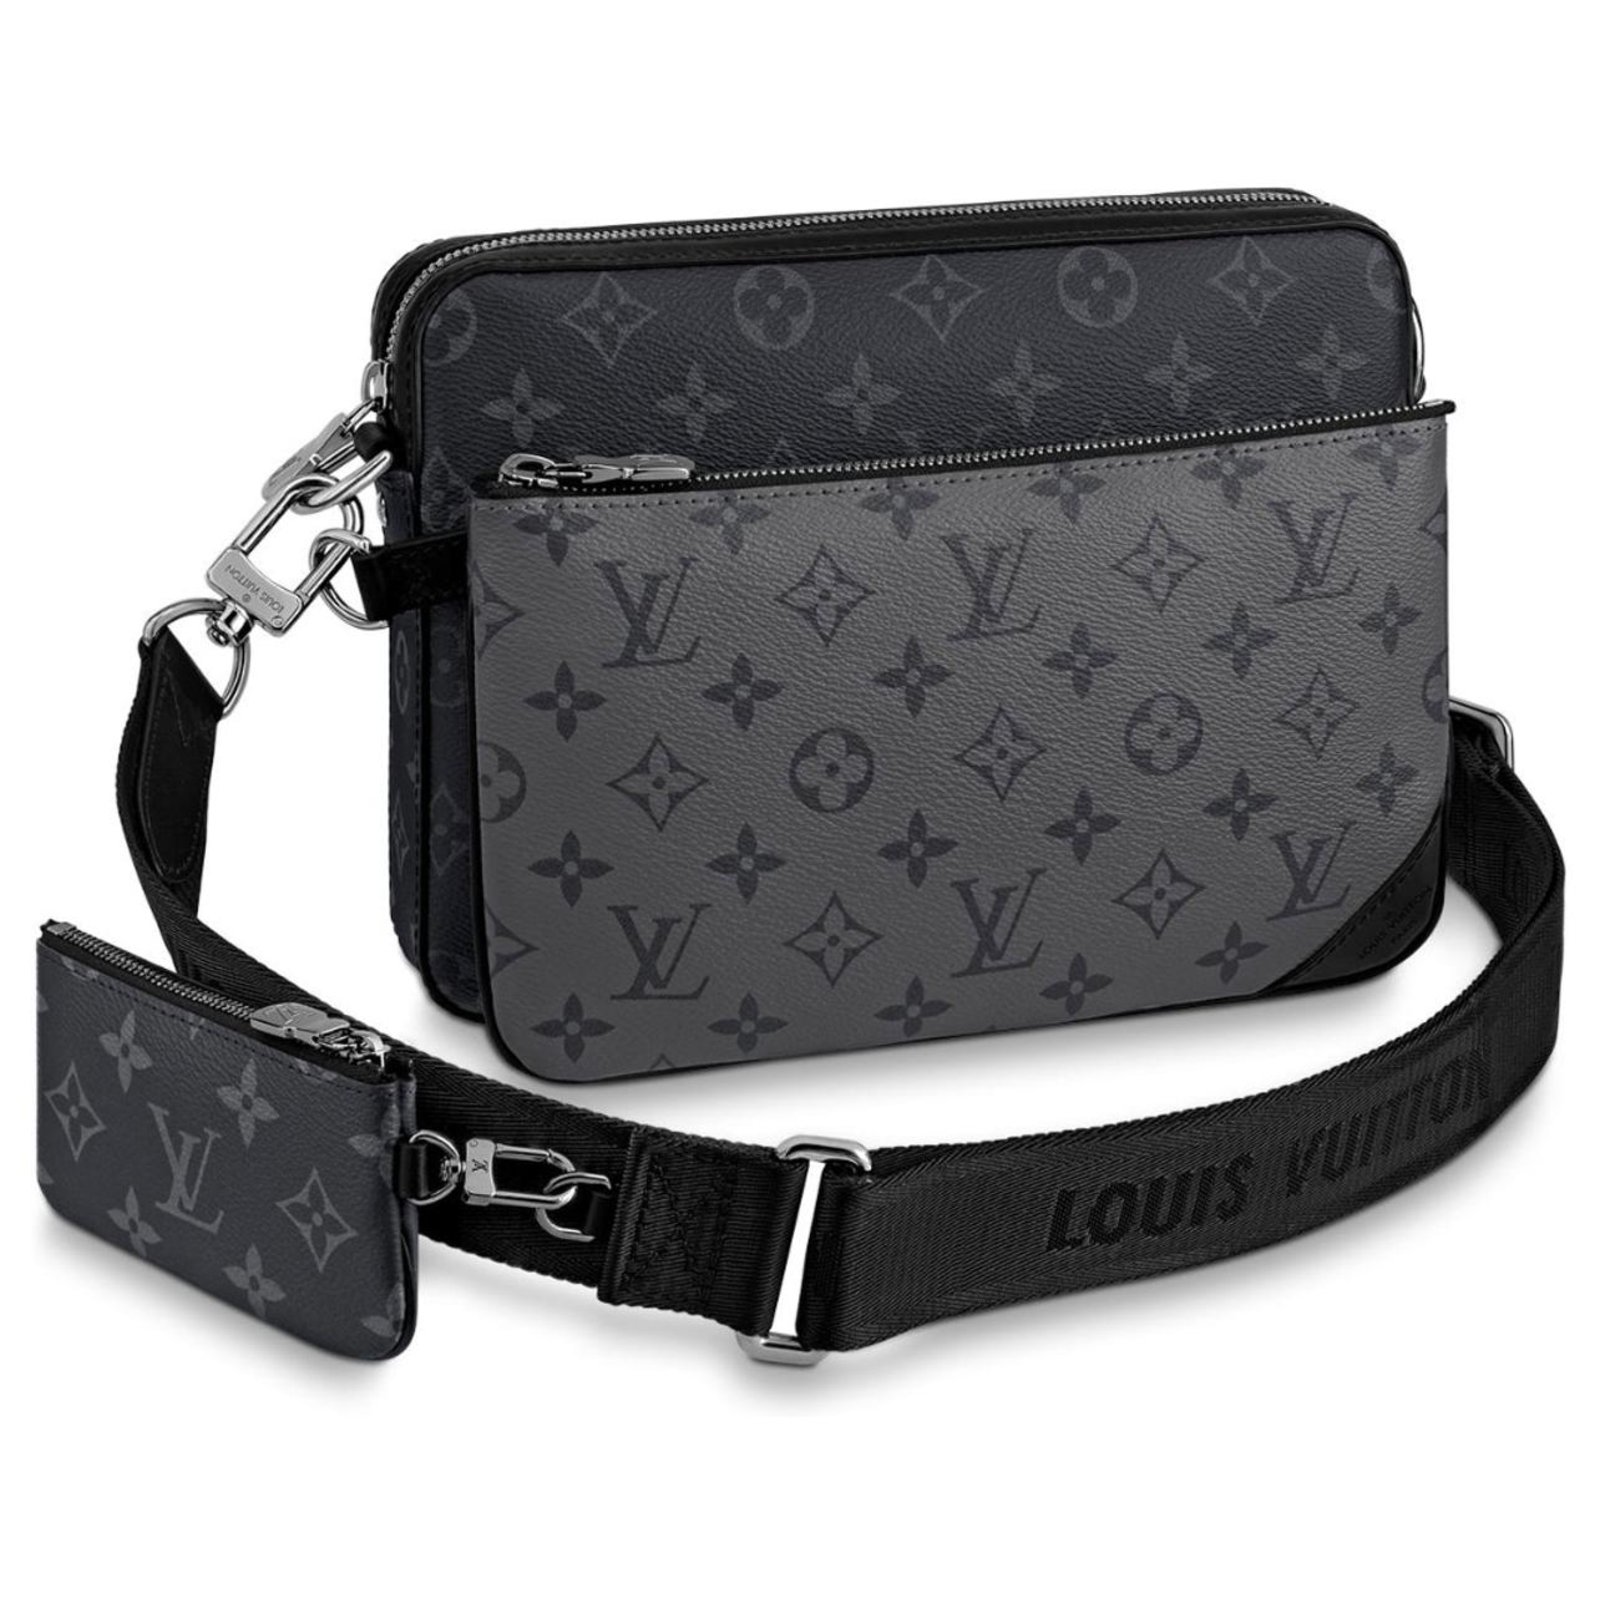 Louis Vuitton Trio Messenger Bag ((CORRECT MATERIAL, CORRECT BOX, 1:1 Rep  lica) ( Wholesale and retail, worldwide shipping, Pls Contact Whatsapp at  +8618559333945 to make an order or check details） FROM SUPLOOK :  r/Suplookbag